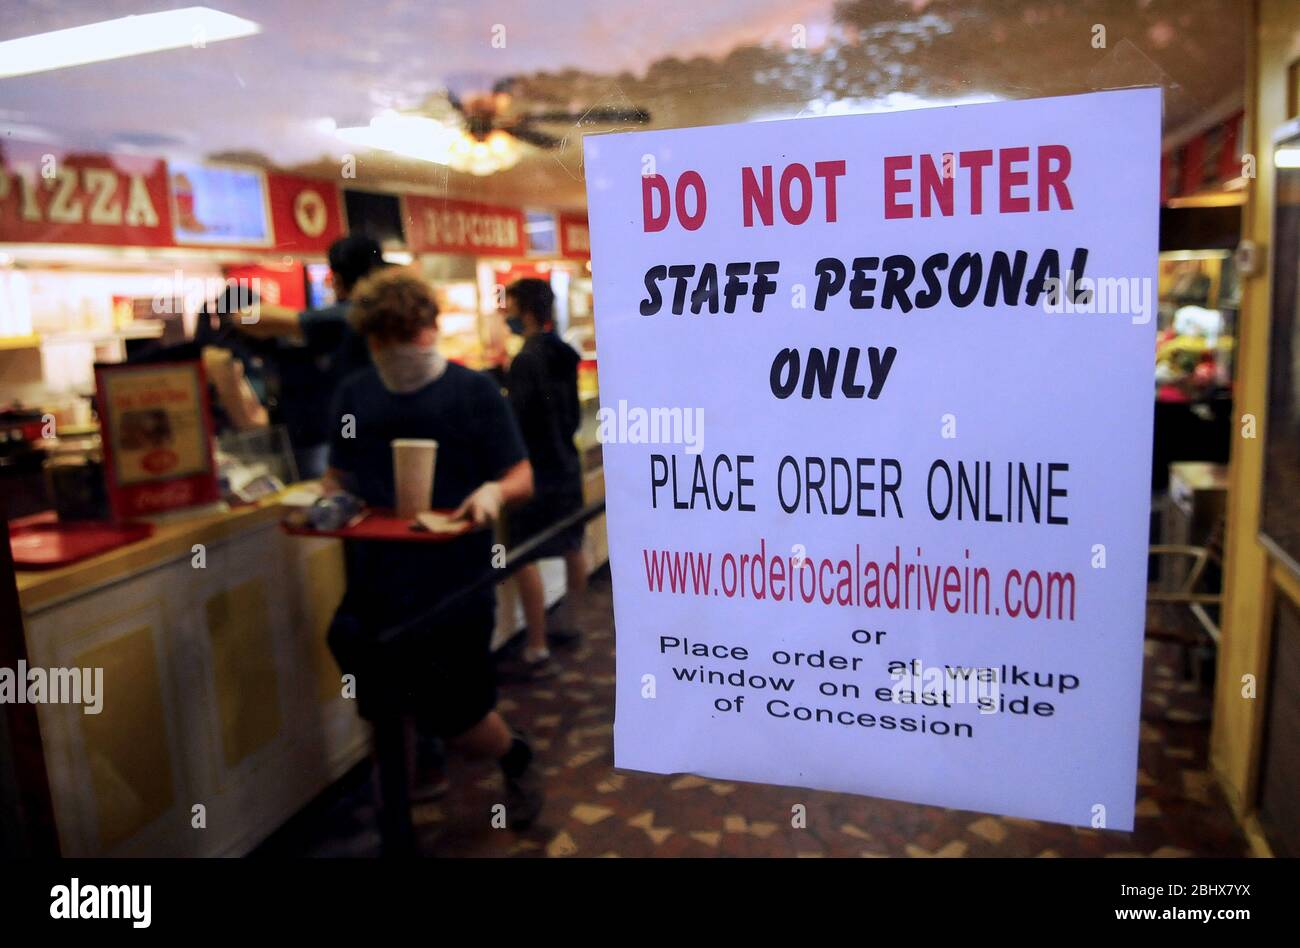 Ocala, United States. 27th Apr, 2020. A sign hangs at the concession stand advises customers to place their order online at the Ocala Drive-in Theatre, one of the few Florida movie theaters permitted to operate during the COVID-19 stay-at-home order.Half of the parking spaces are roped off, providing 10-12 feet of social distance between each vehicle, and food orders are delivered to cars by servers wearing protective masks and gloves. Credit: SOPA Images Limited/Alamy Live News Stock Photo